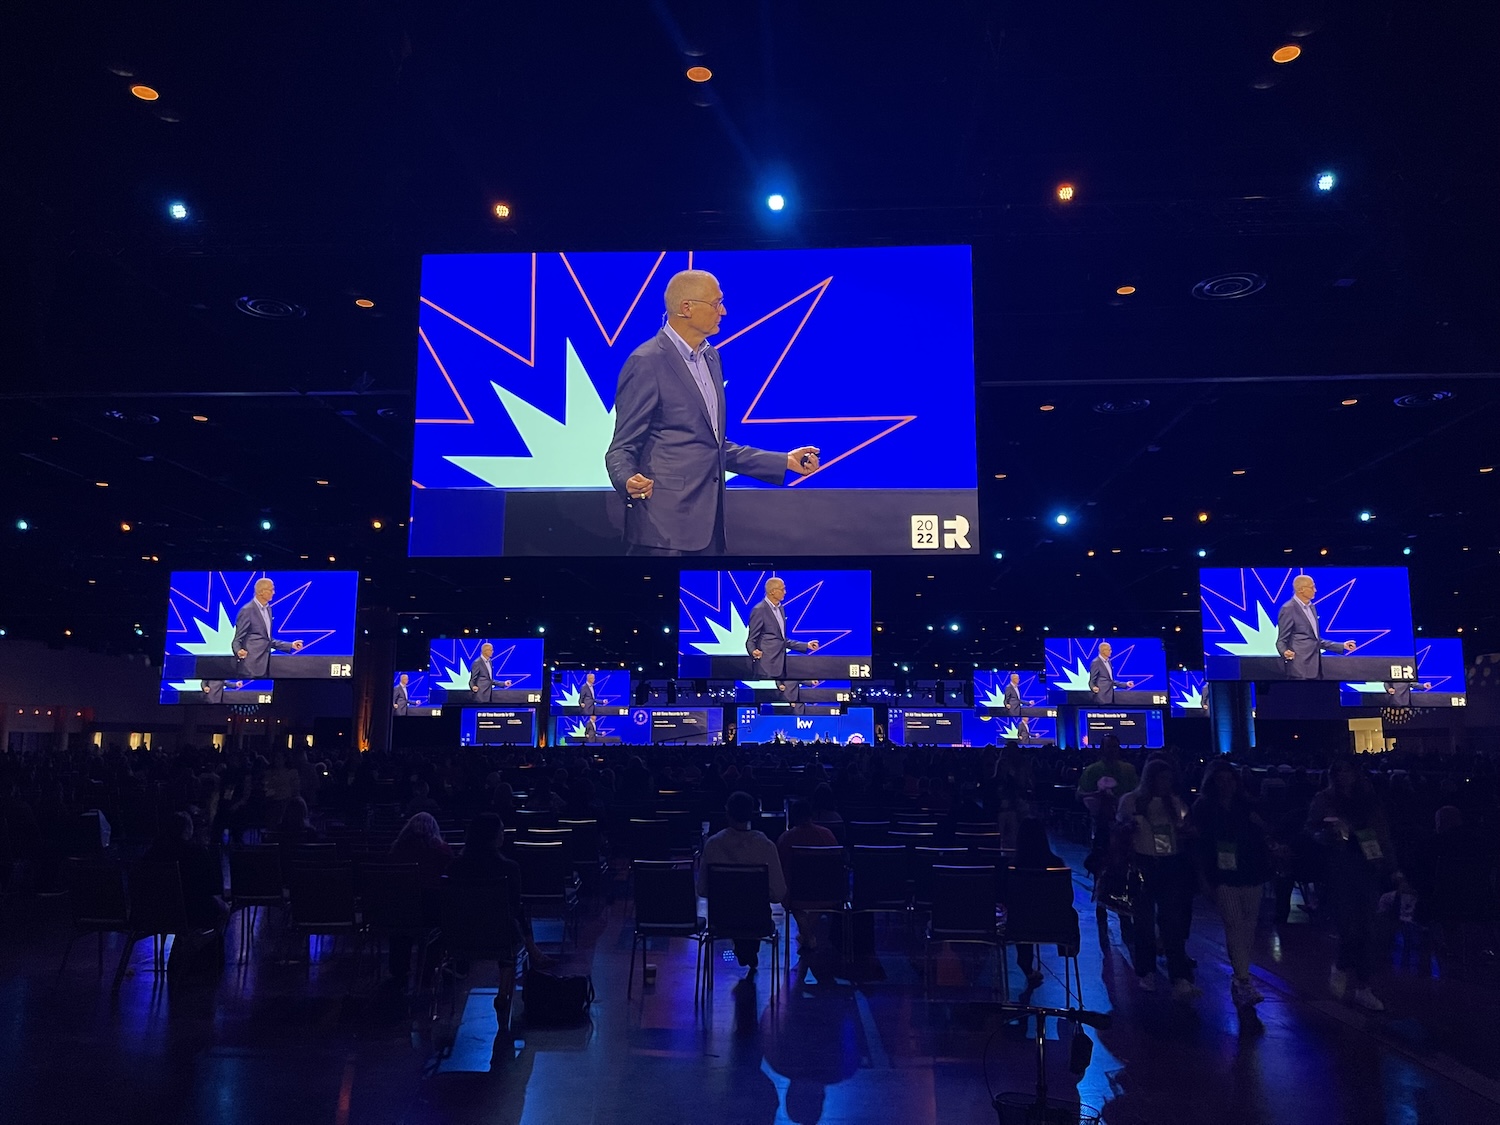 A conference room with a speaker on stage, displayed on multiple large screens with a blue and white graphic design, and an audience in a large event space.